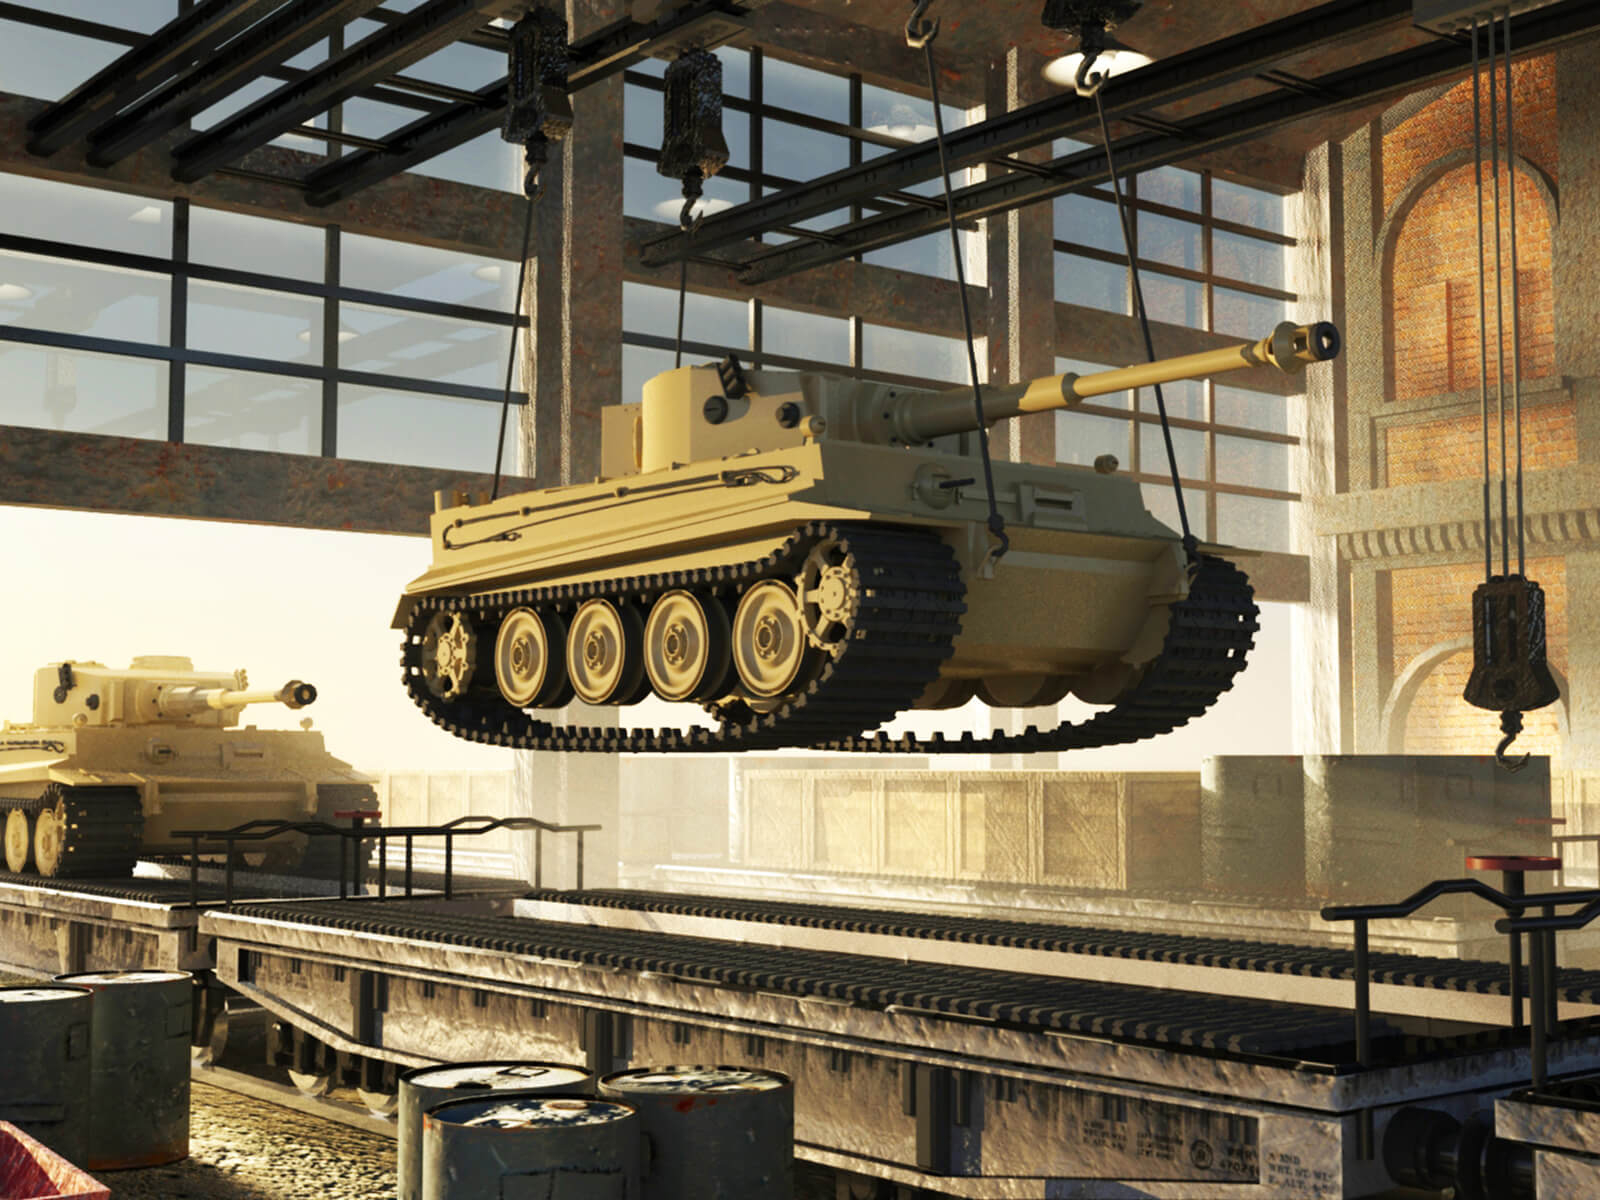 computer-generated 3d model of a tank suspended above a track in a warehouse-type building